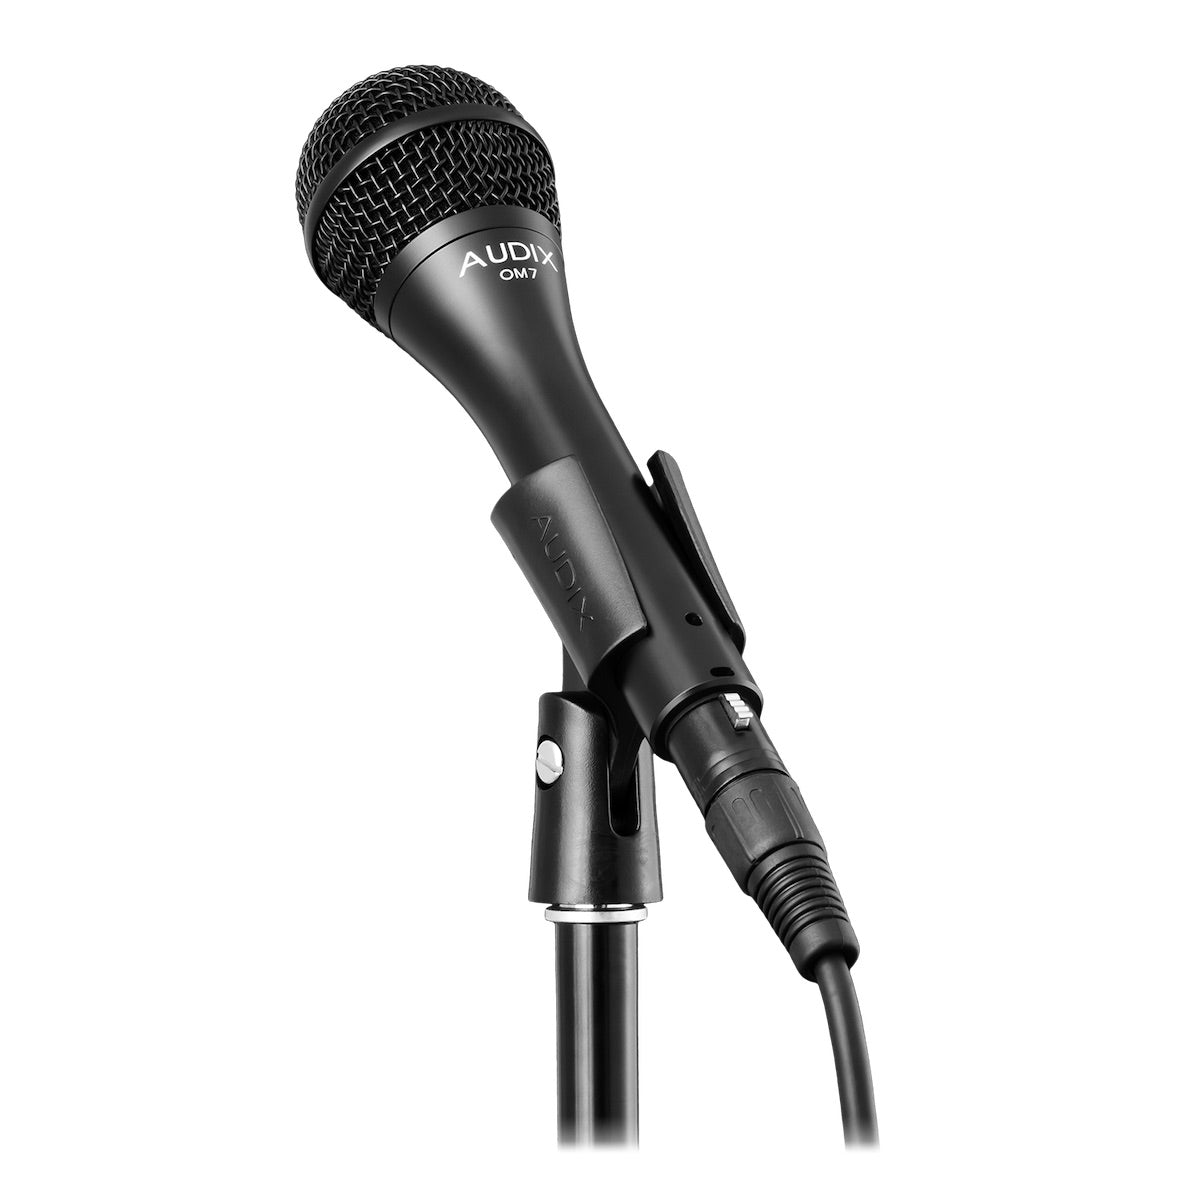 Audix OM7 Professional Dynamic Vocal Microphone with clip